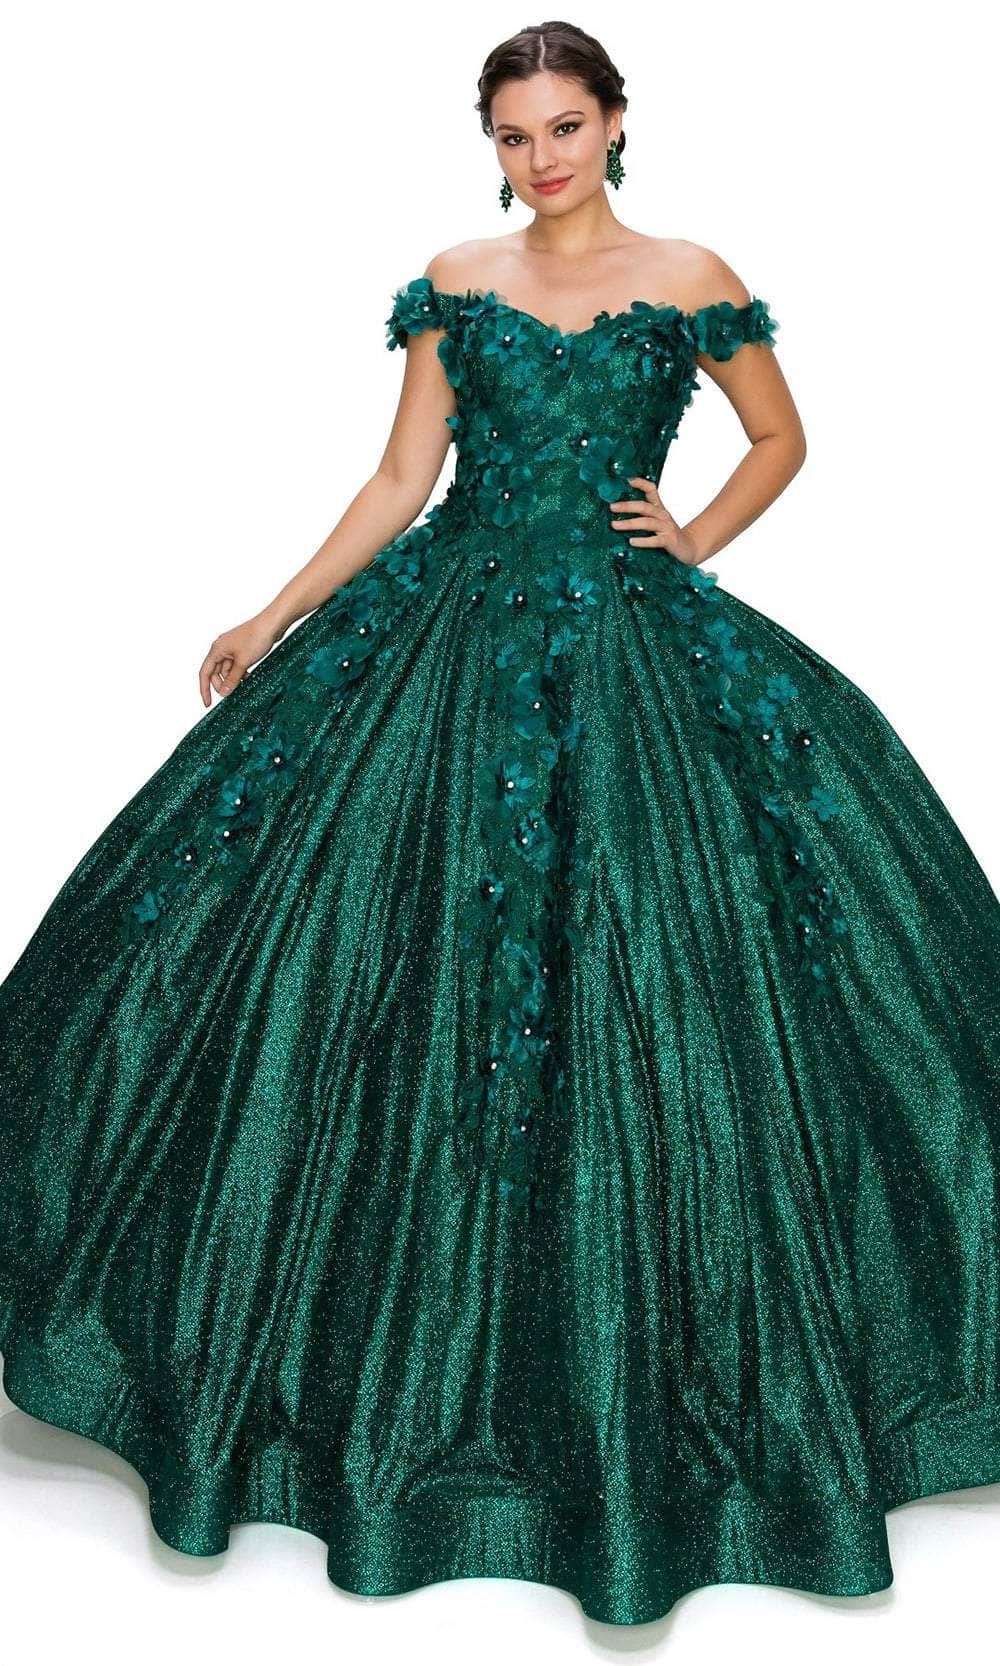 Cinderella Couture 8020J - 3D Floral Appliqued Ballgown Special Occasion Dress XS / Green Hunter